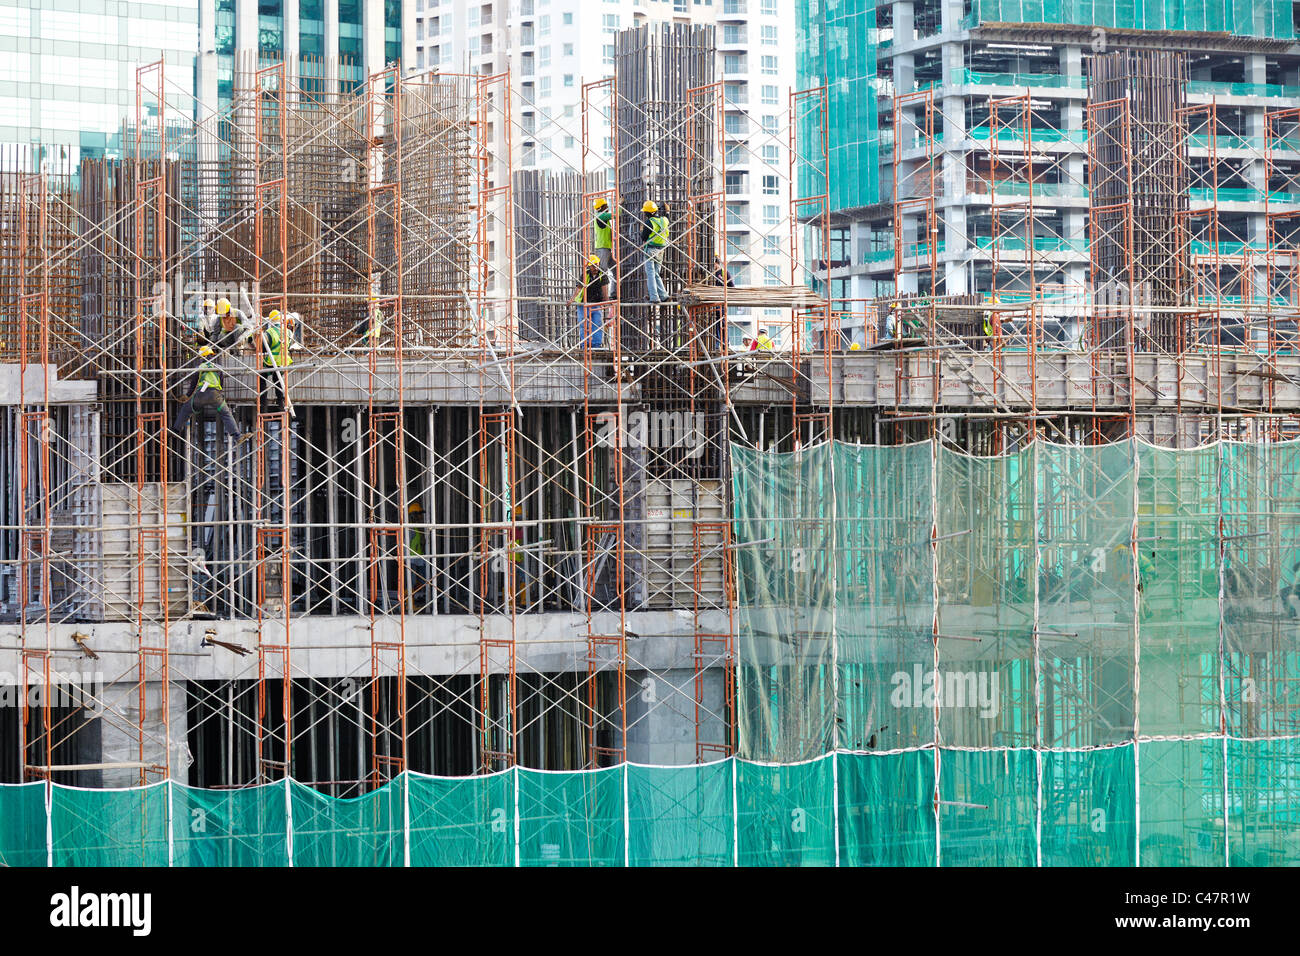 Construction and steel works on a high rise building close up Stock Photo